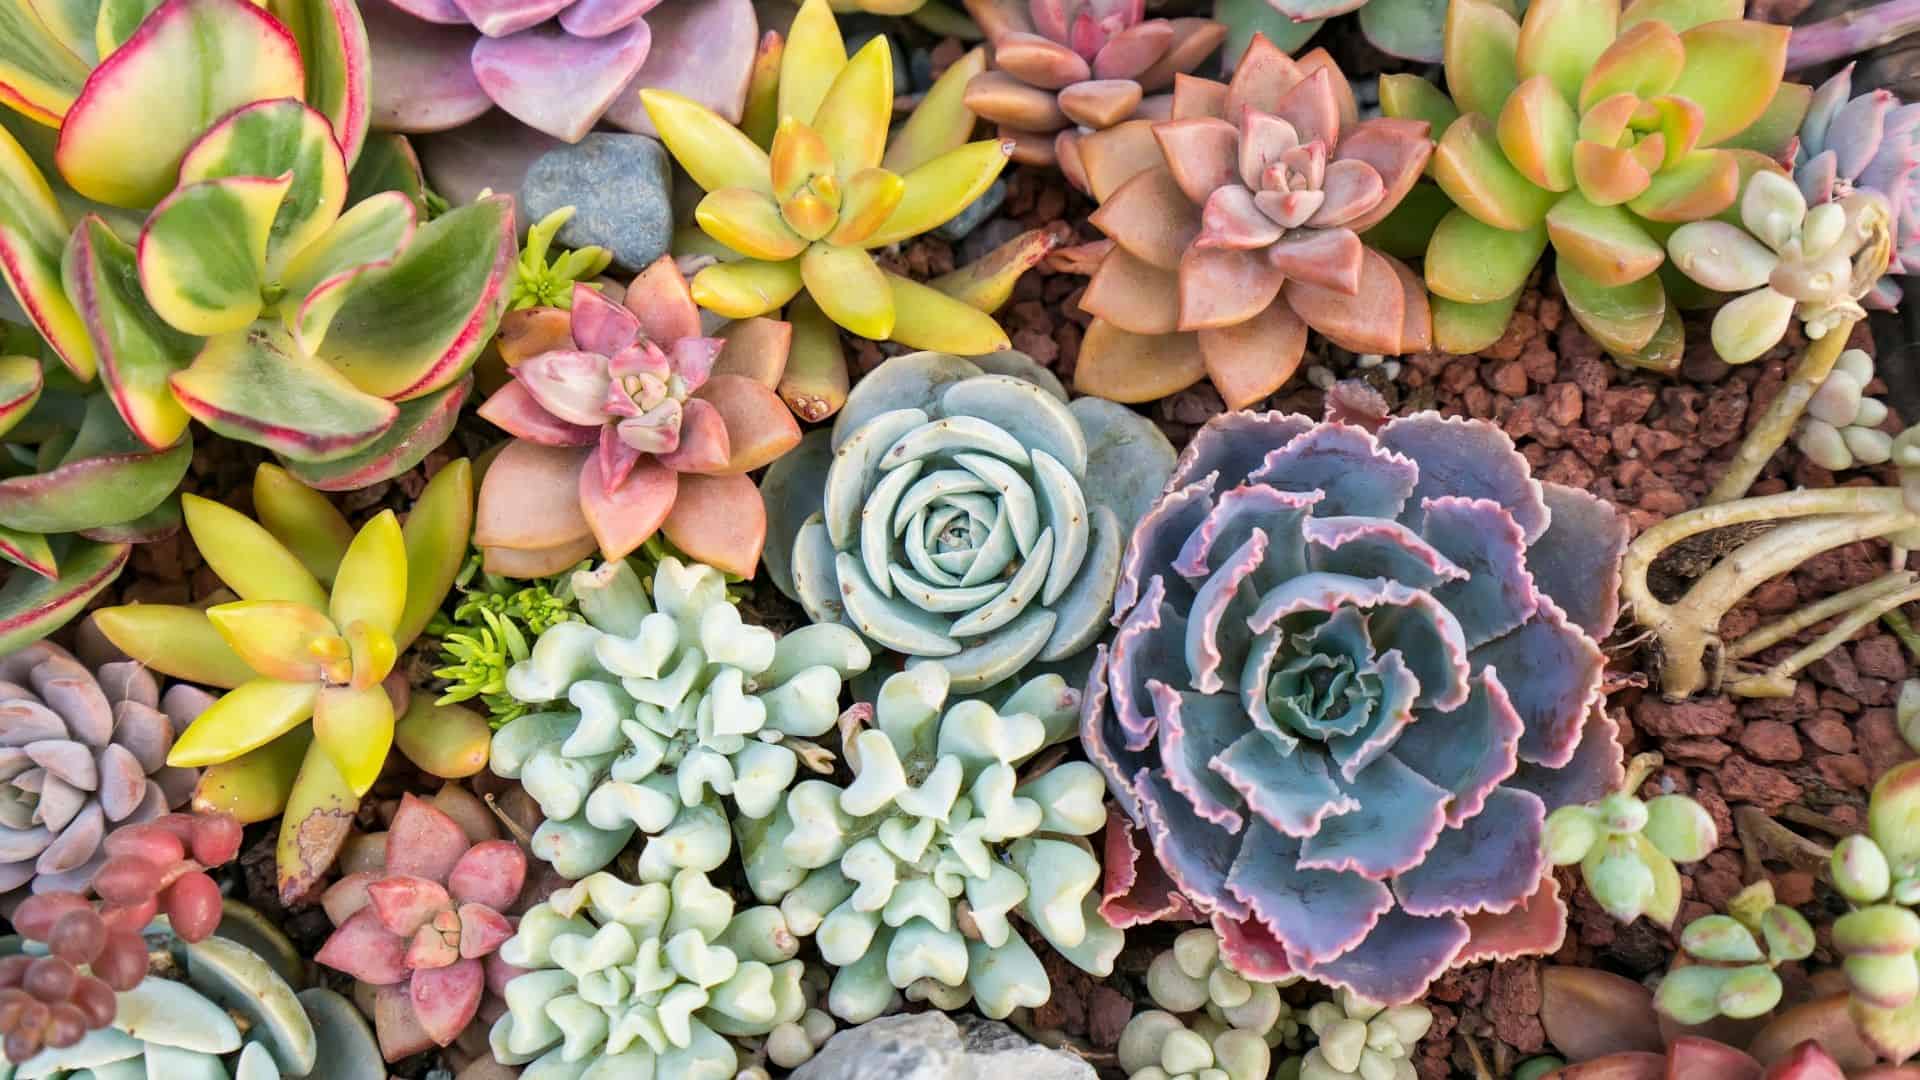 Mini Garden Starter Plants by The Succulent Cult NO Roots on Plants Great for Terrariums Succulents Plants Live 7 Live Succulent Cuttings 